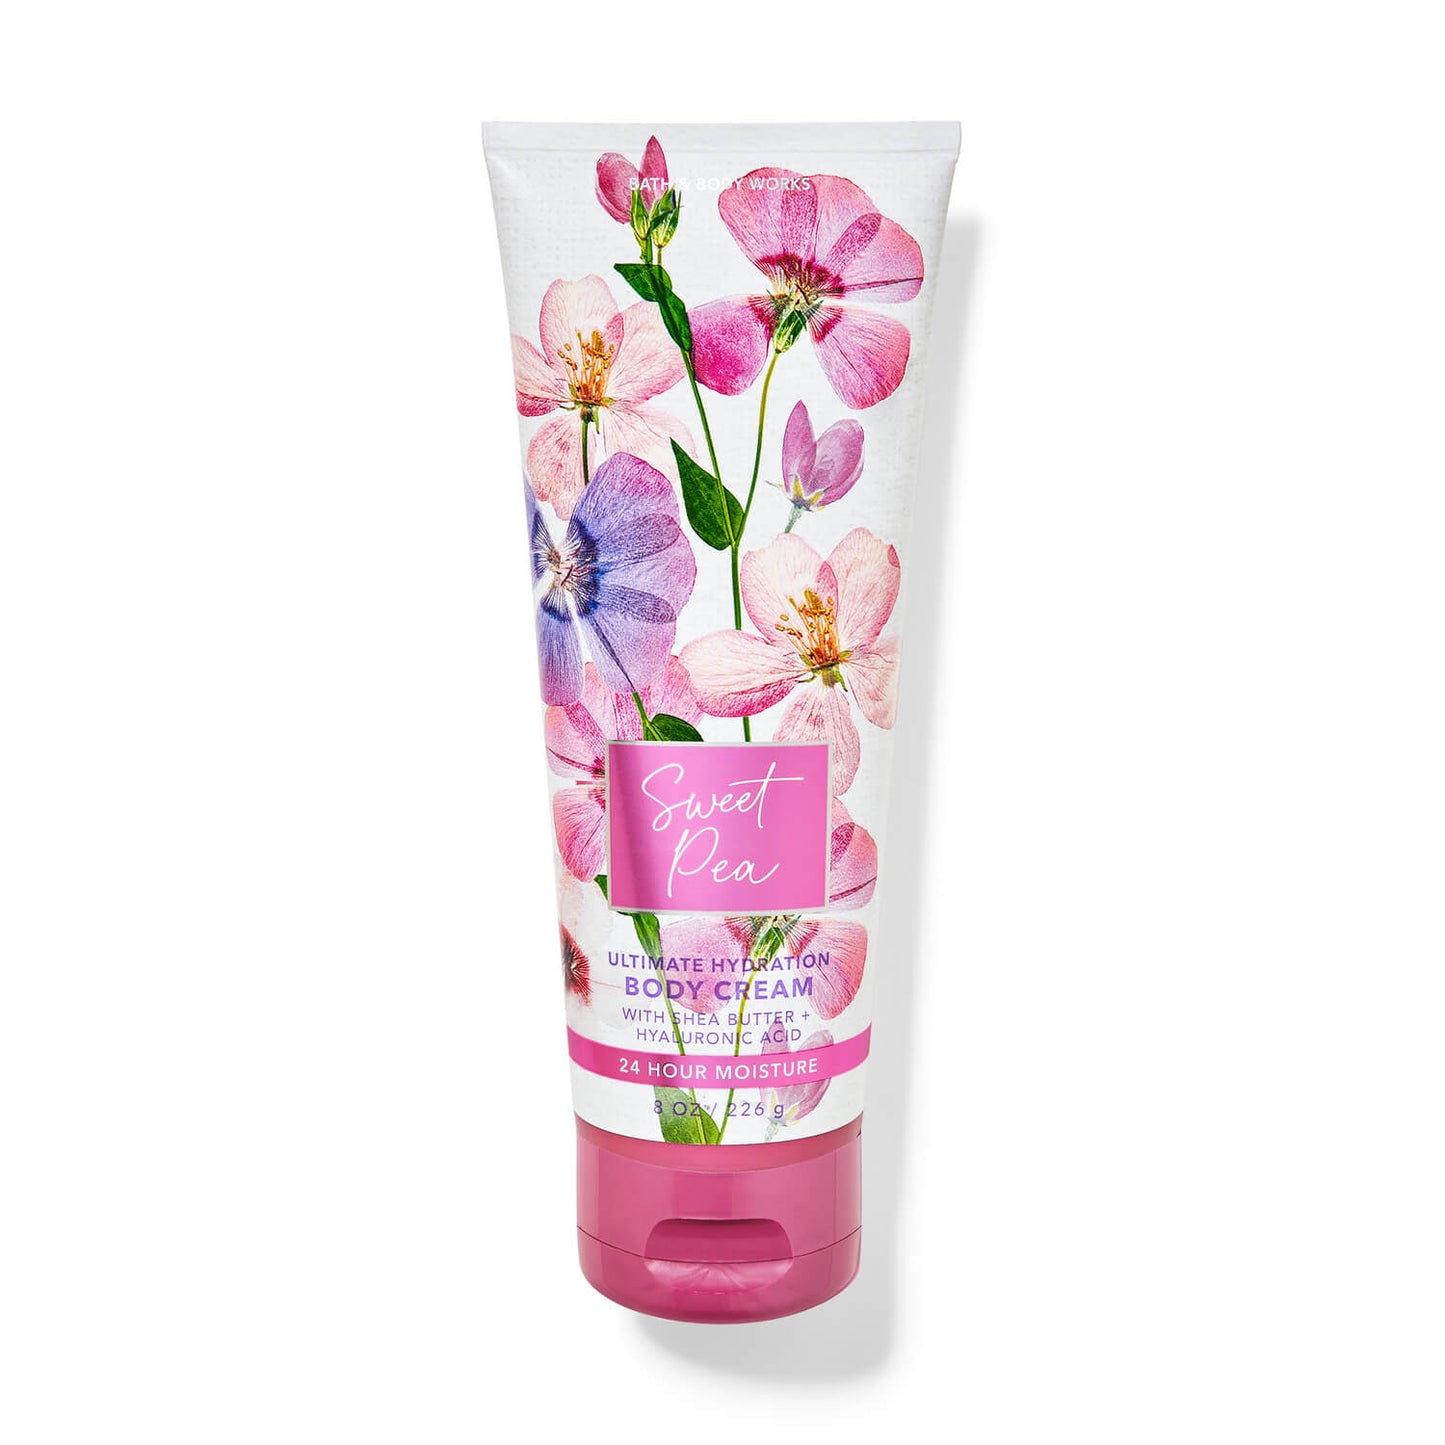 Shop bath and body works body cream in sweet pea fragrance for her available at Heygirl.pk for delivery in Pakistan